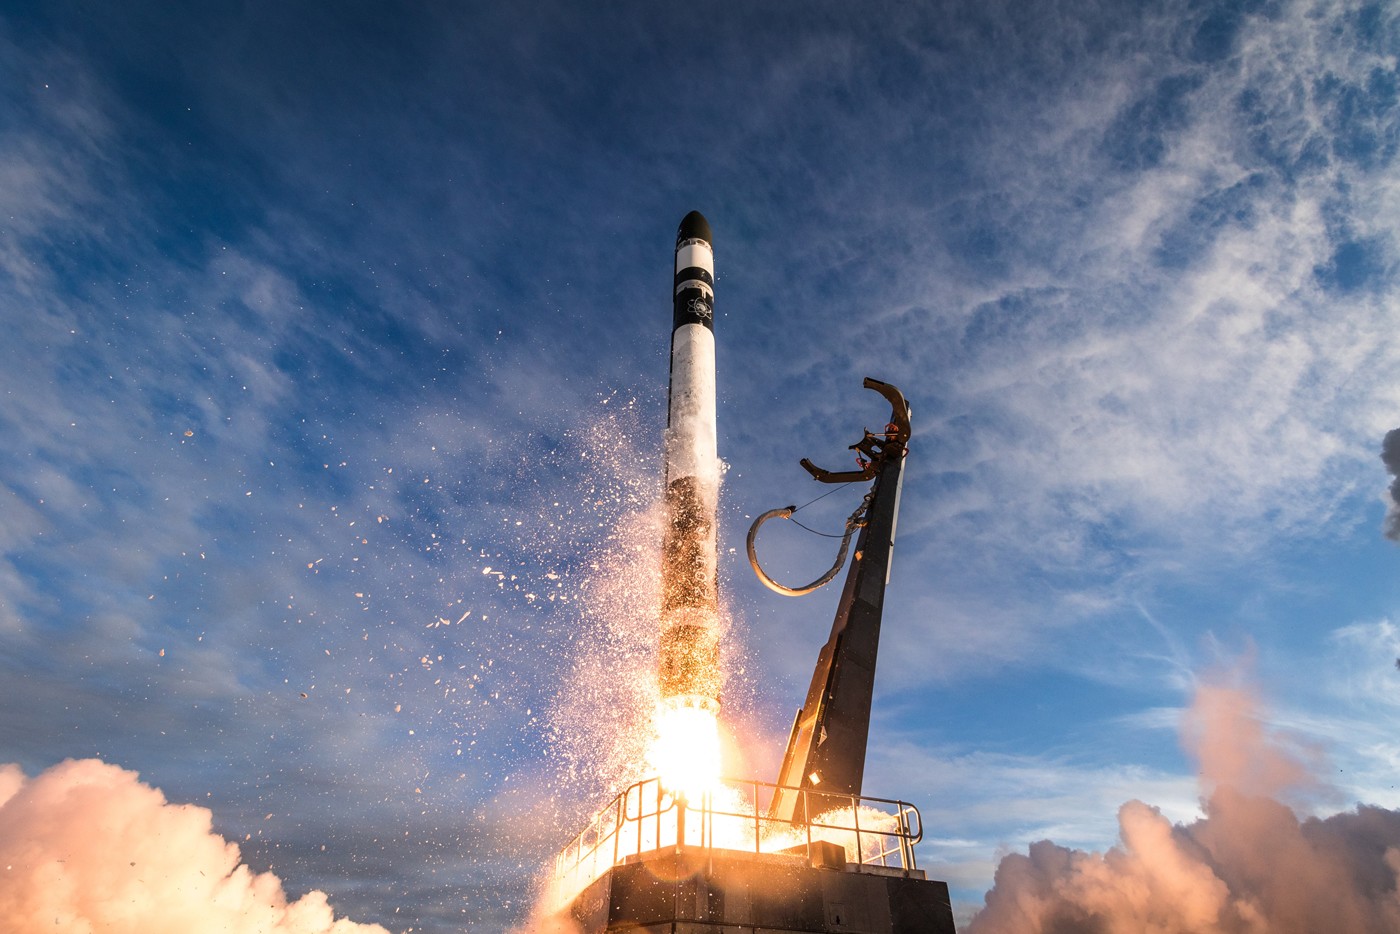 Rocket Lab specializes in launching small satellites into space